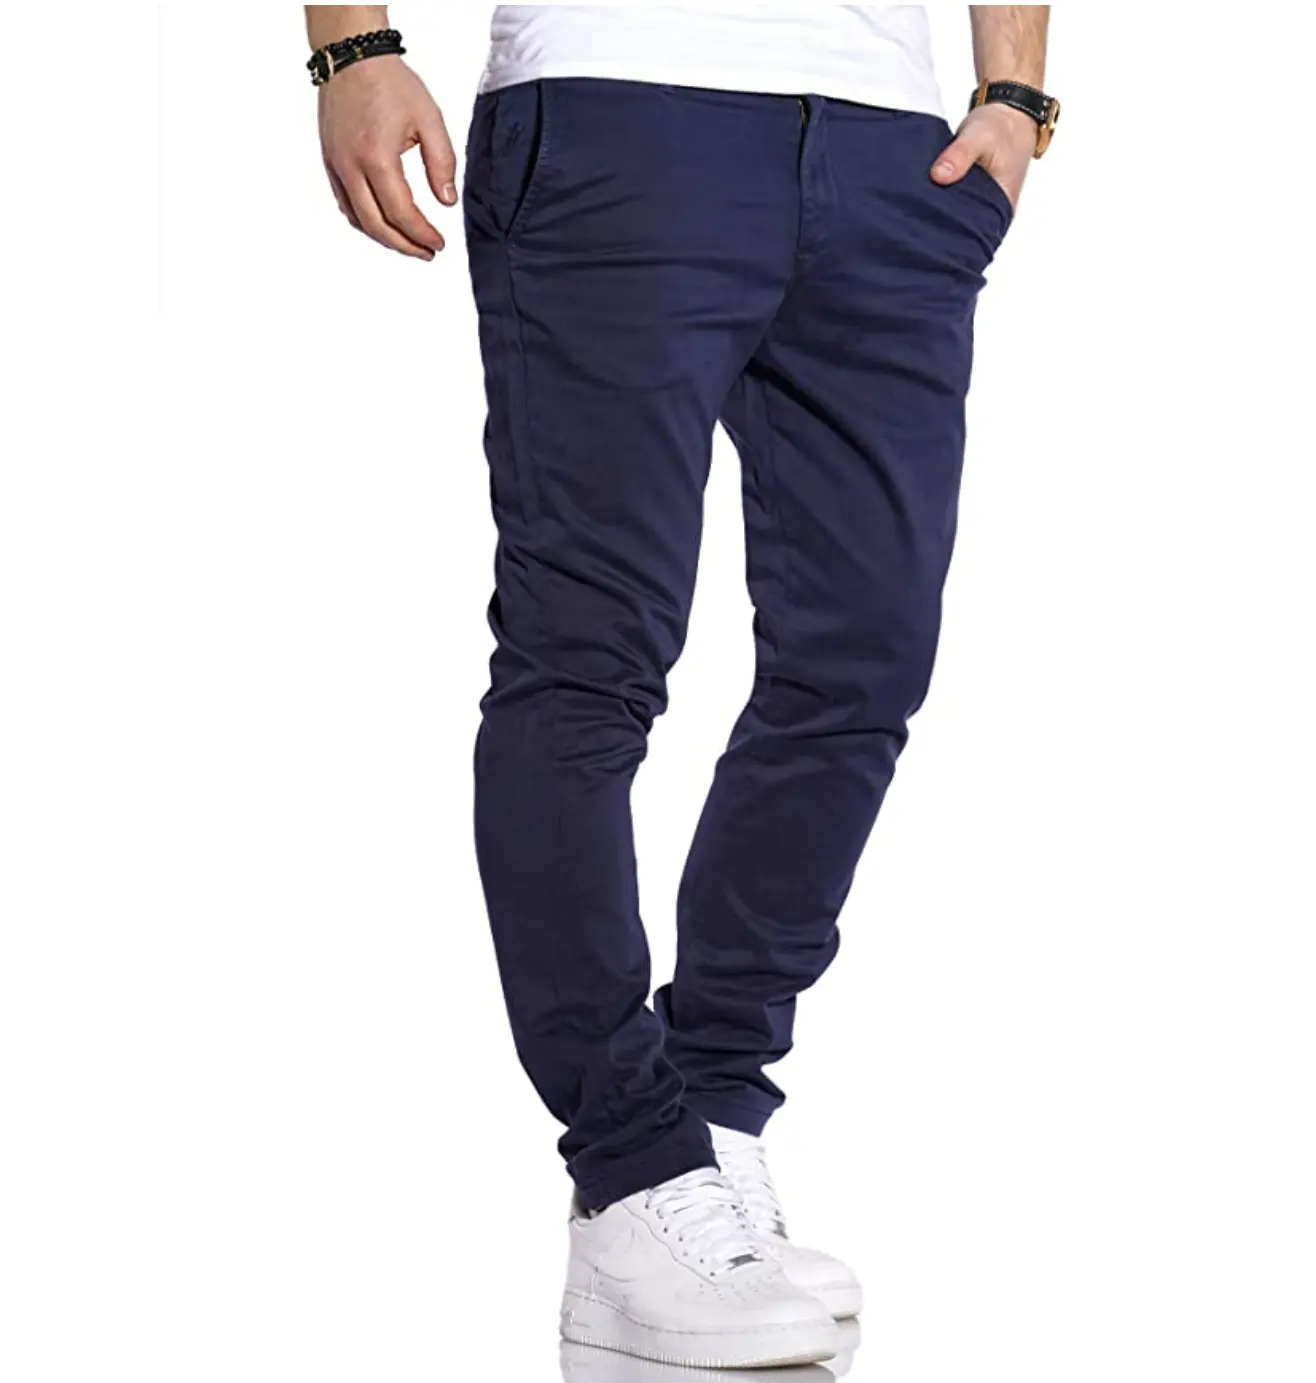 Wholesale High Quality Pants Cotton Casual Full Length Slim Fits Fashion Outdoor Sport Leisure Trousers For Men